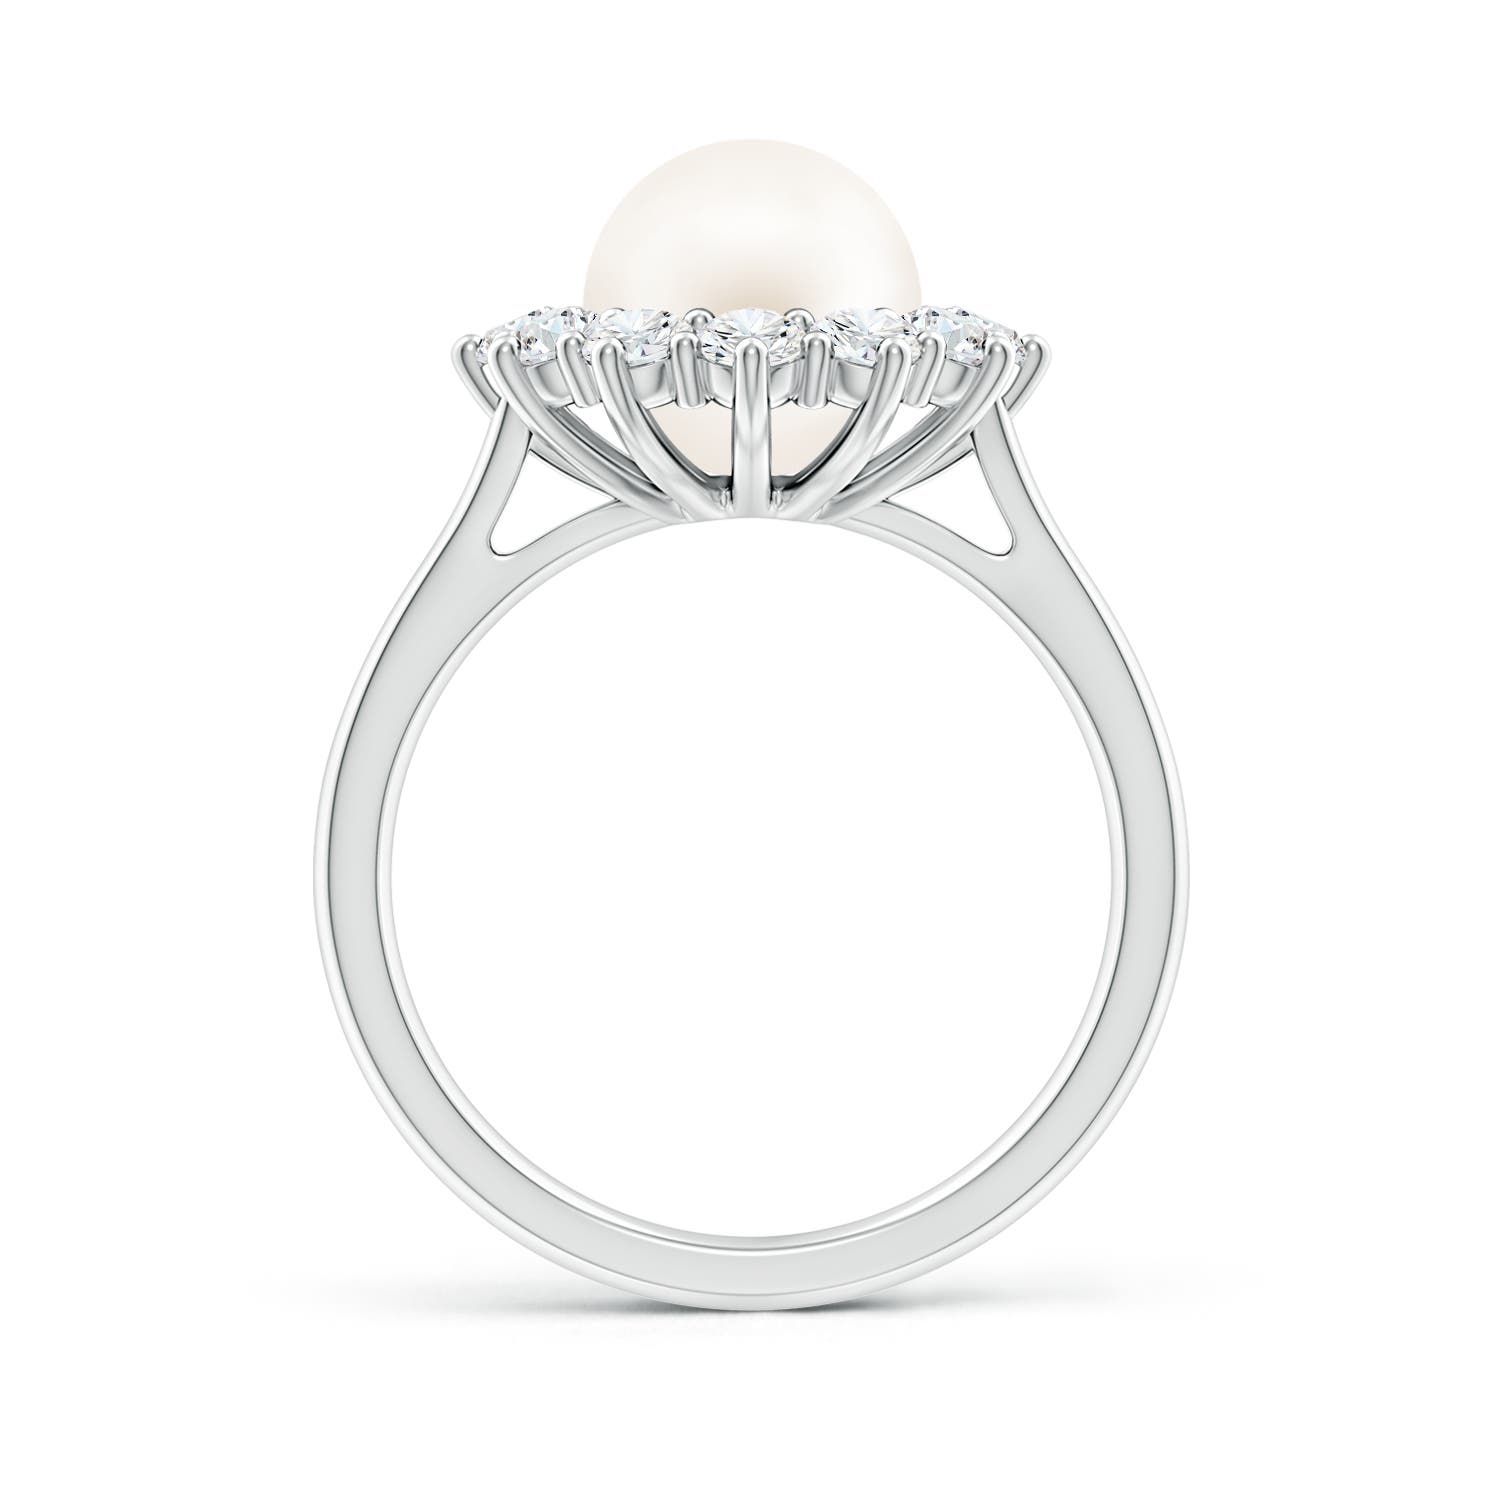 AA / 4.4 CT / 14 KT White Gold